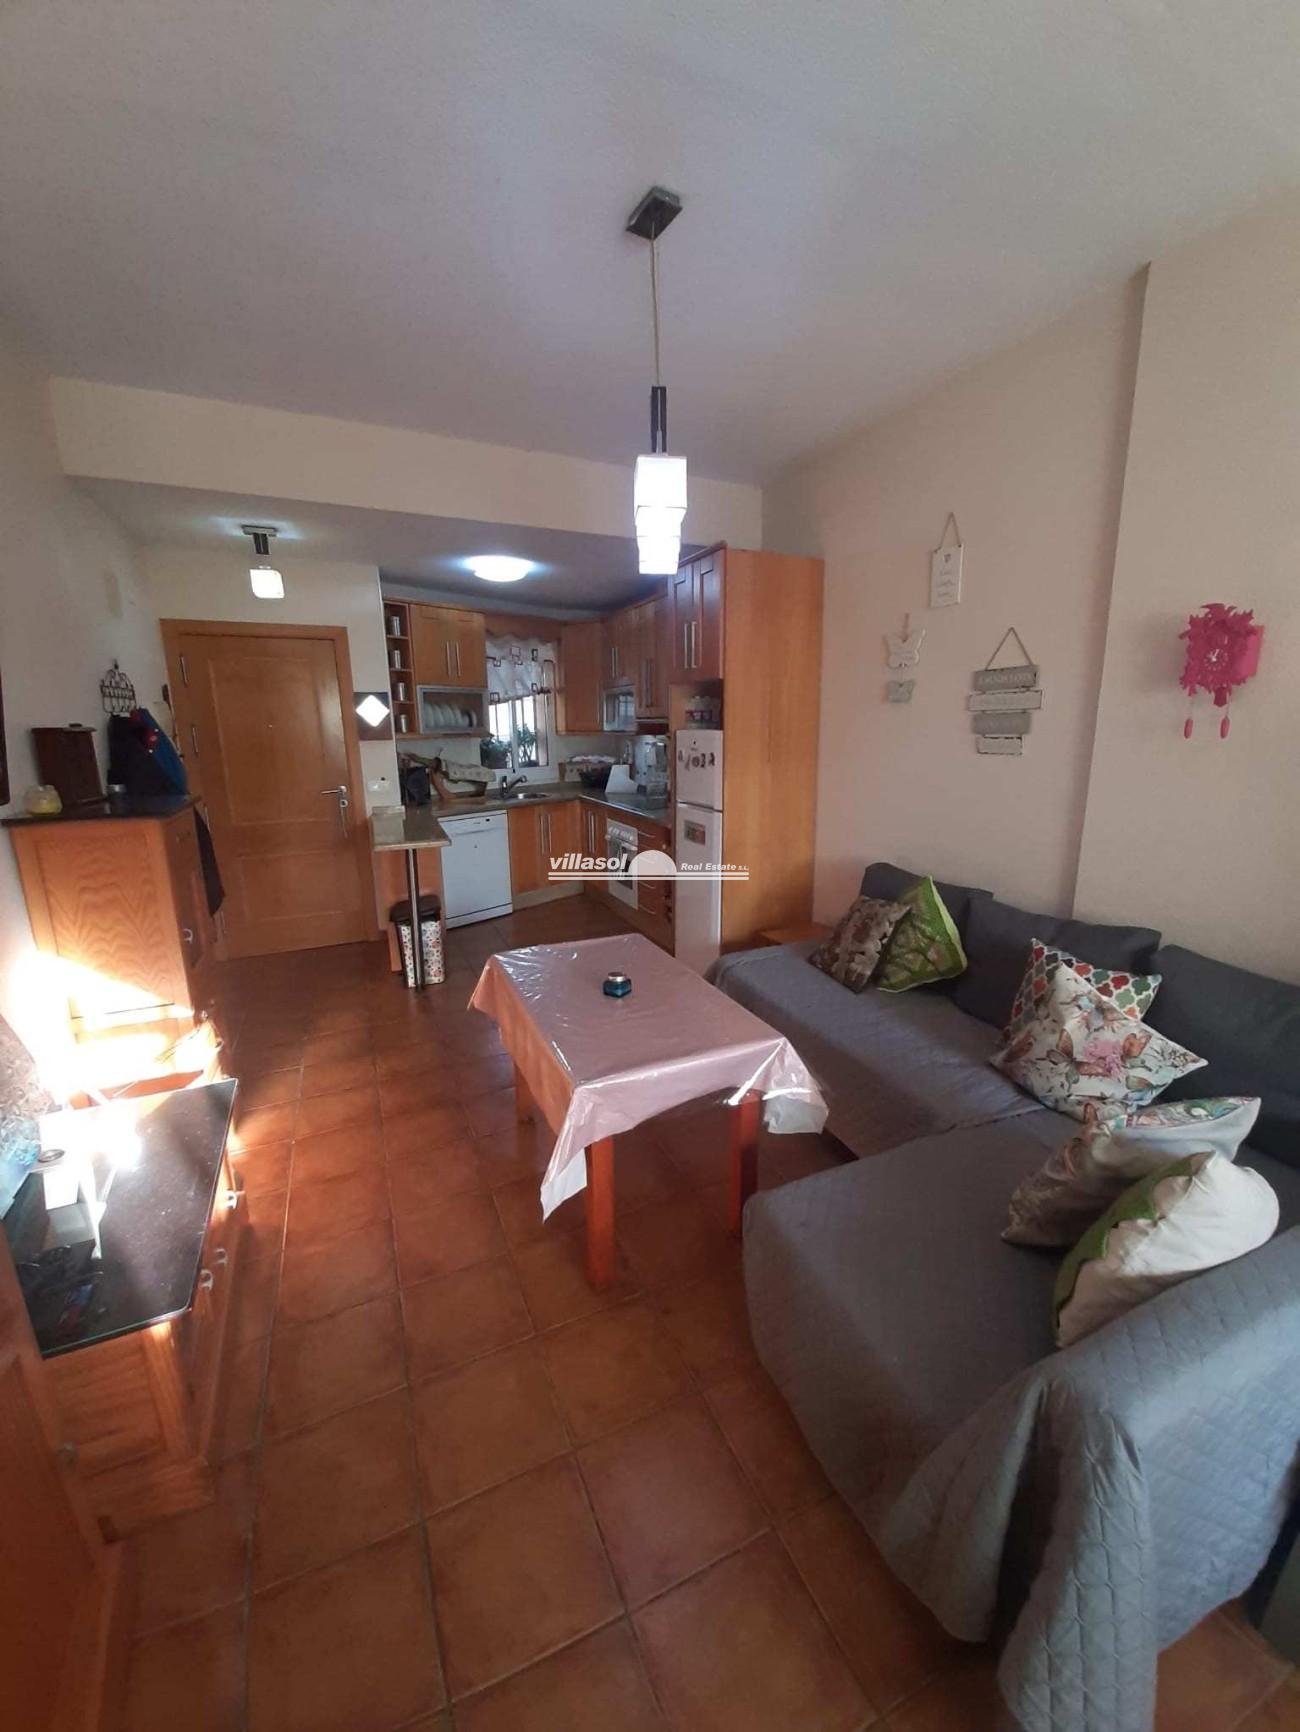 Nice Groundfloor Apartment With 2 Bedrooms In El Peñoncillo, Close To The Beach For Sale